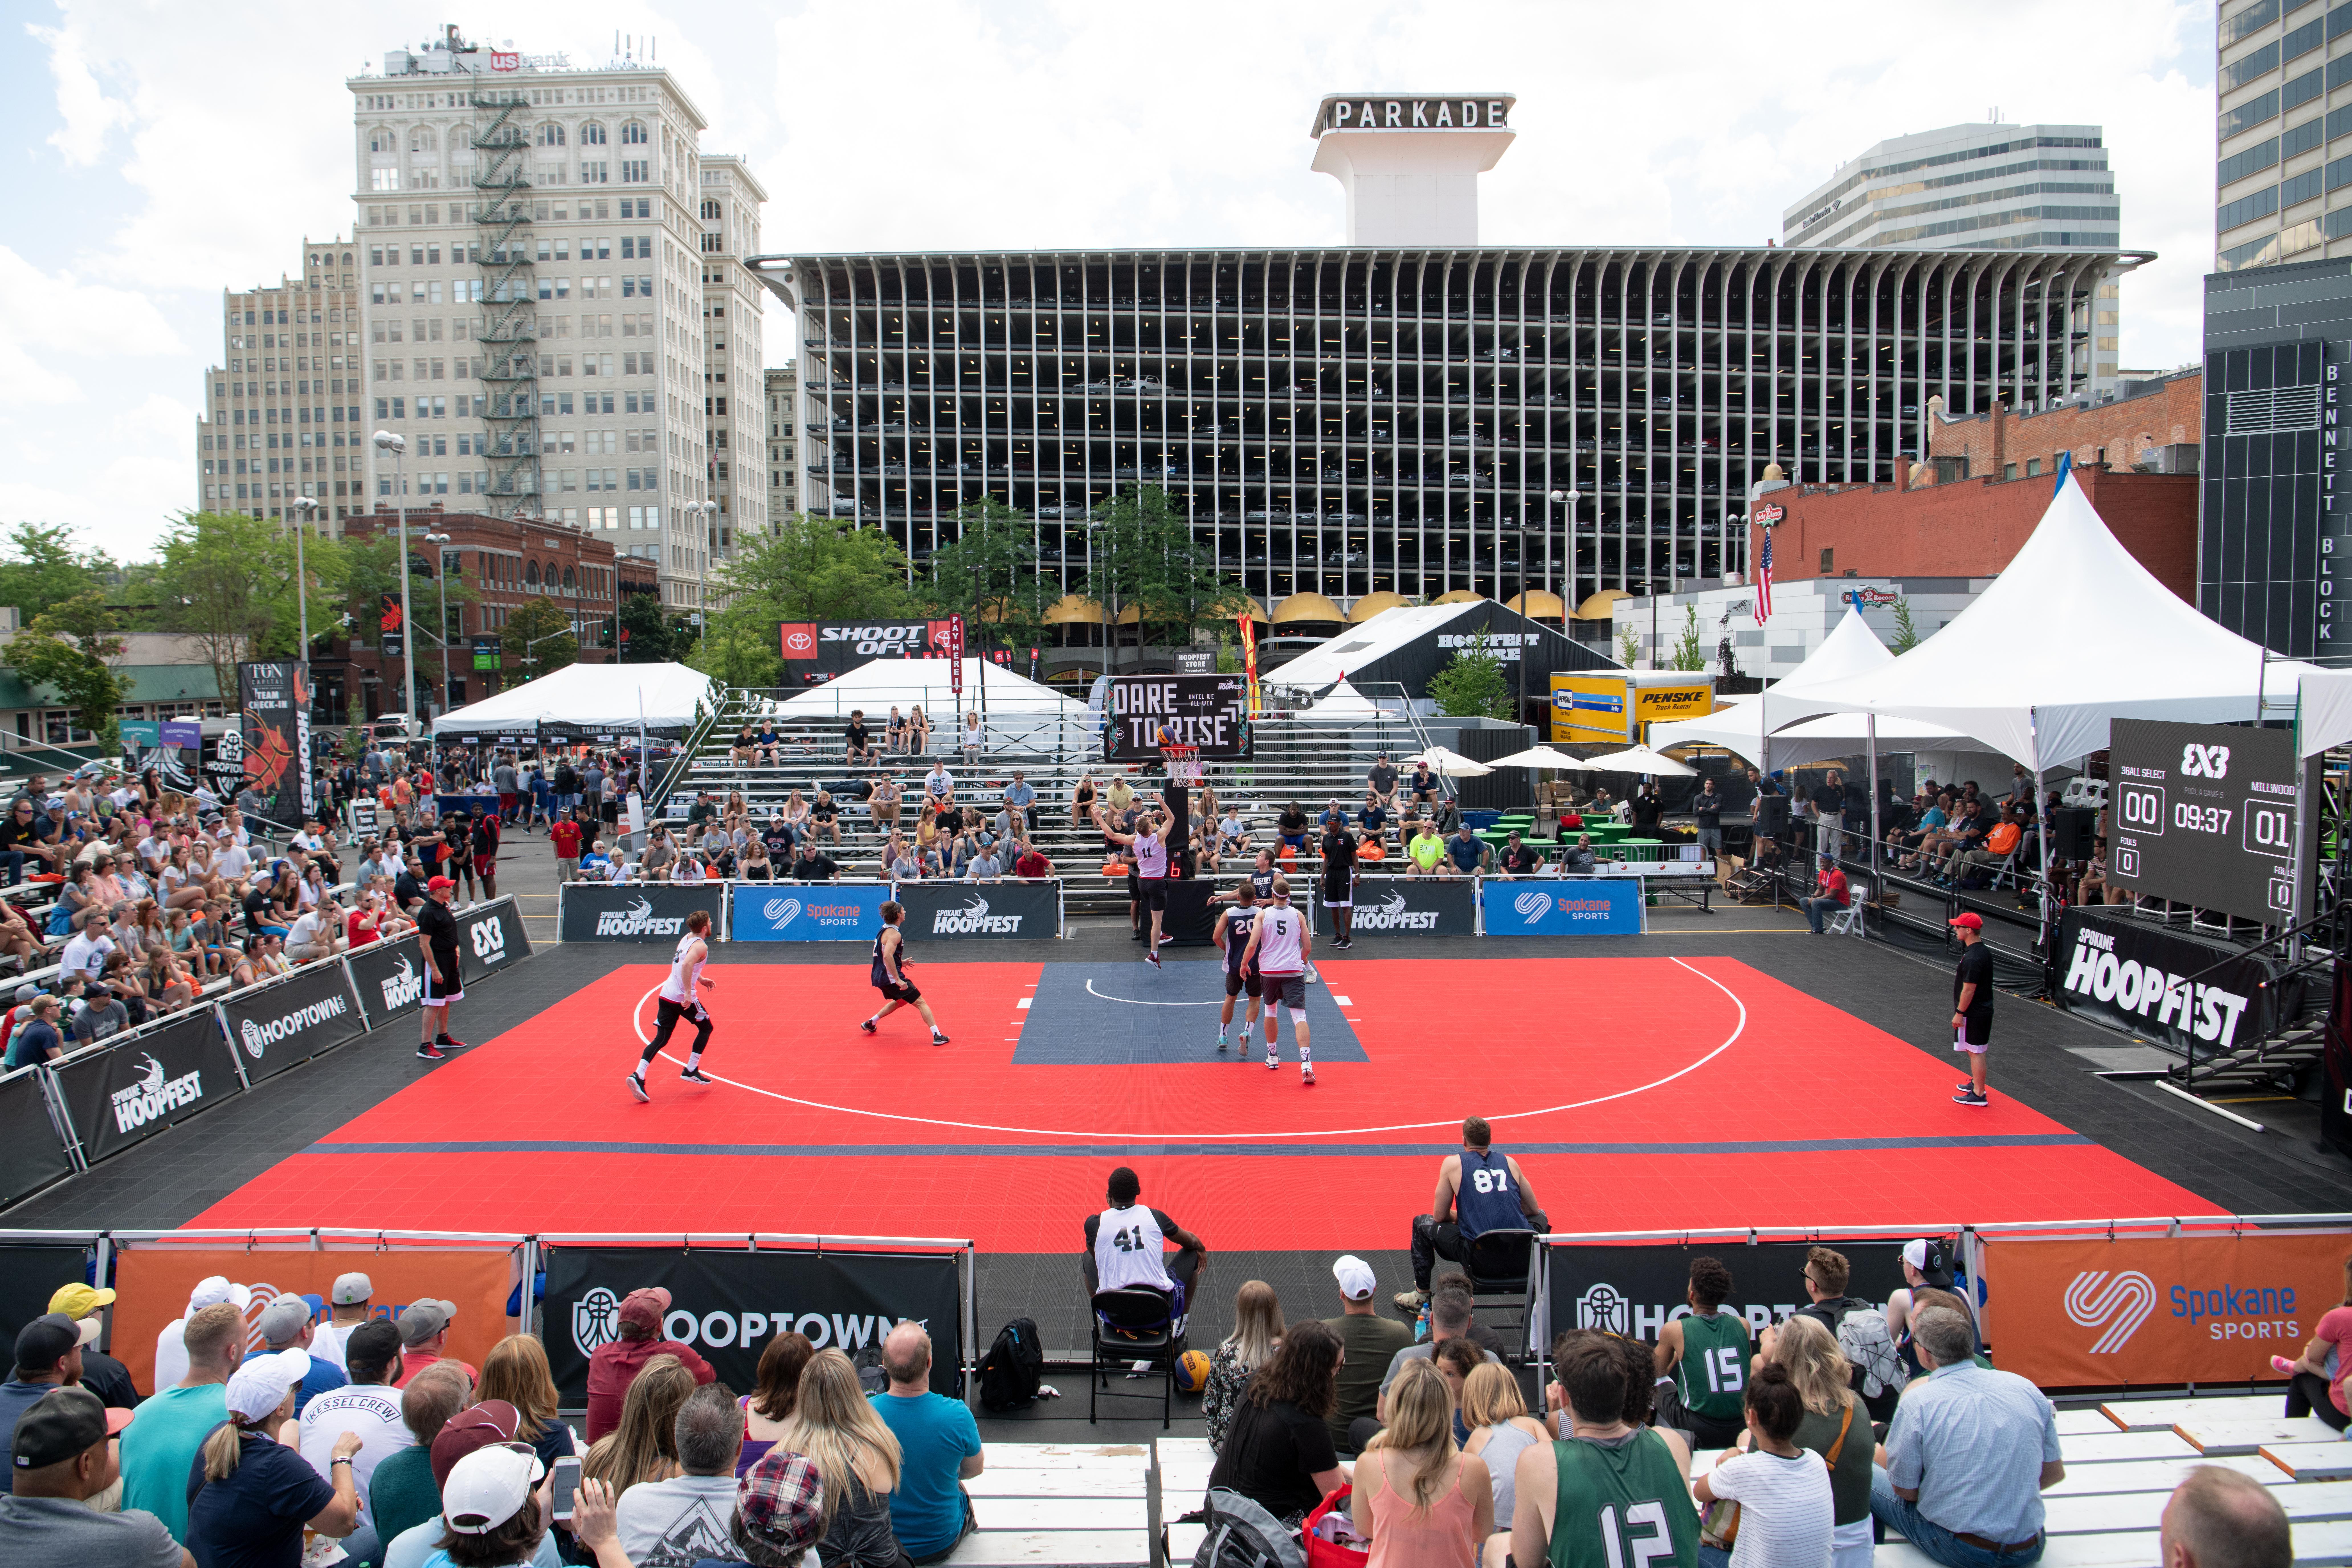 Hoopfest kicks off 30th year with fastpaced tournament in downtown